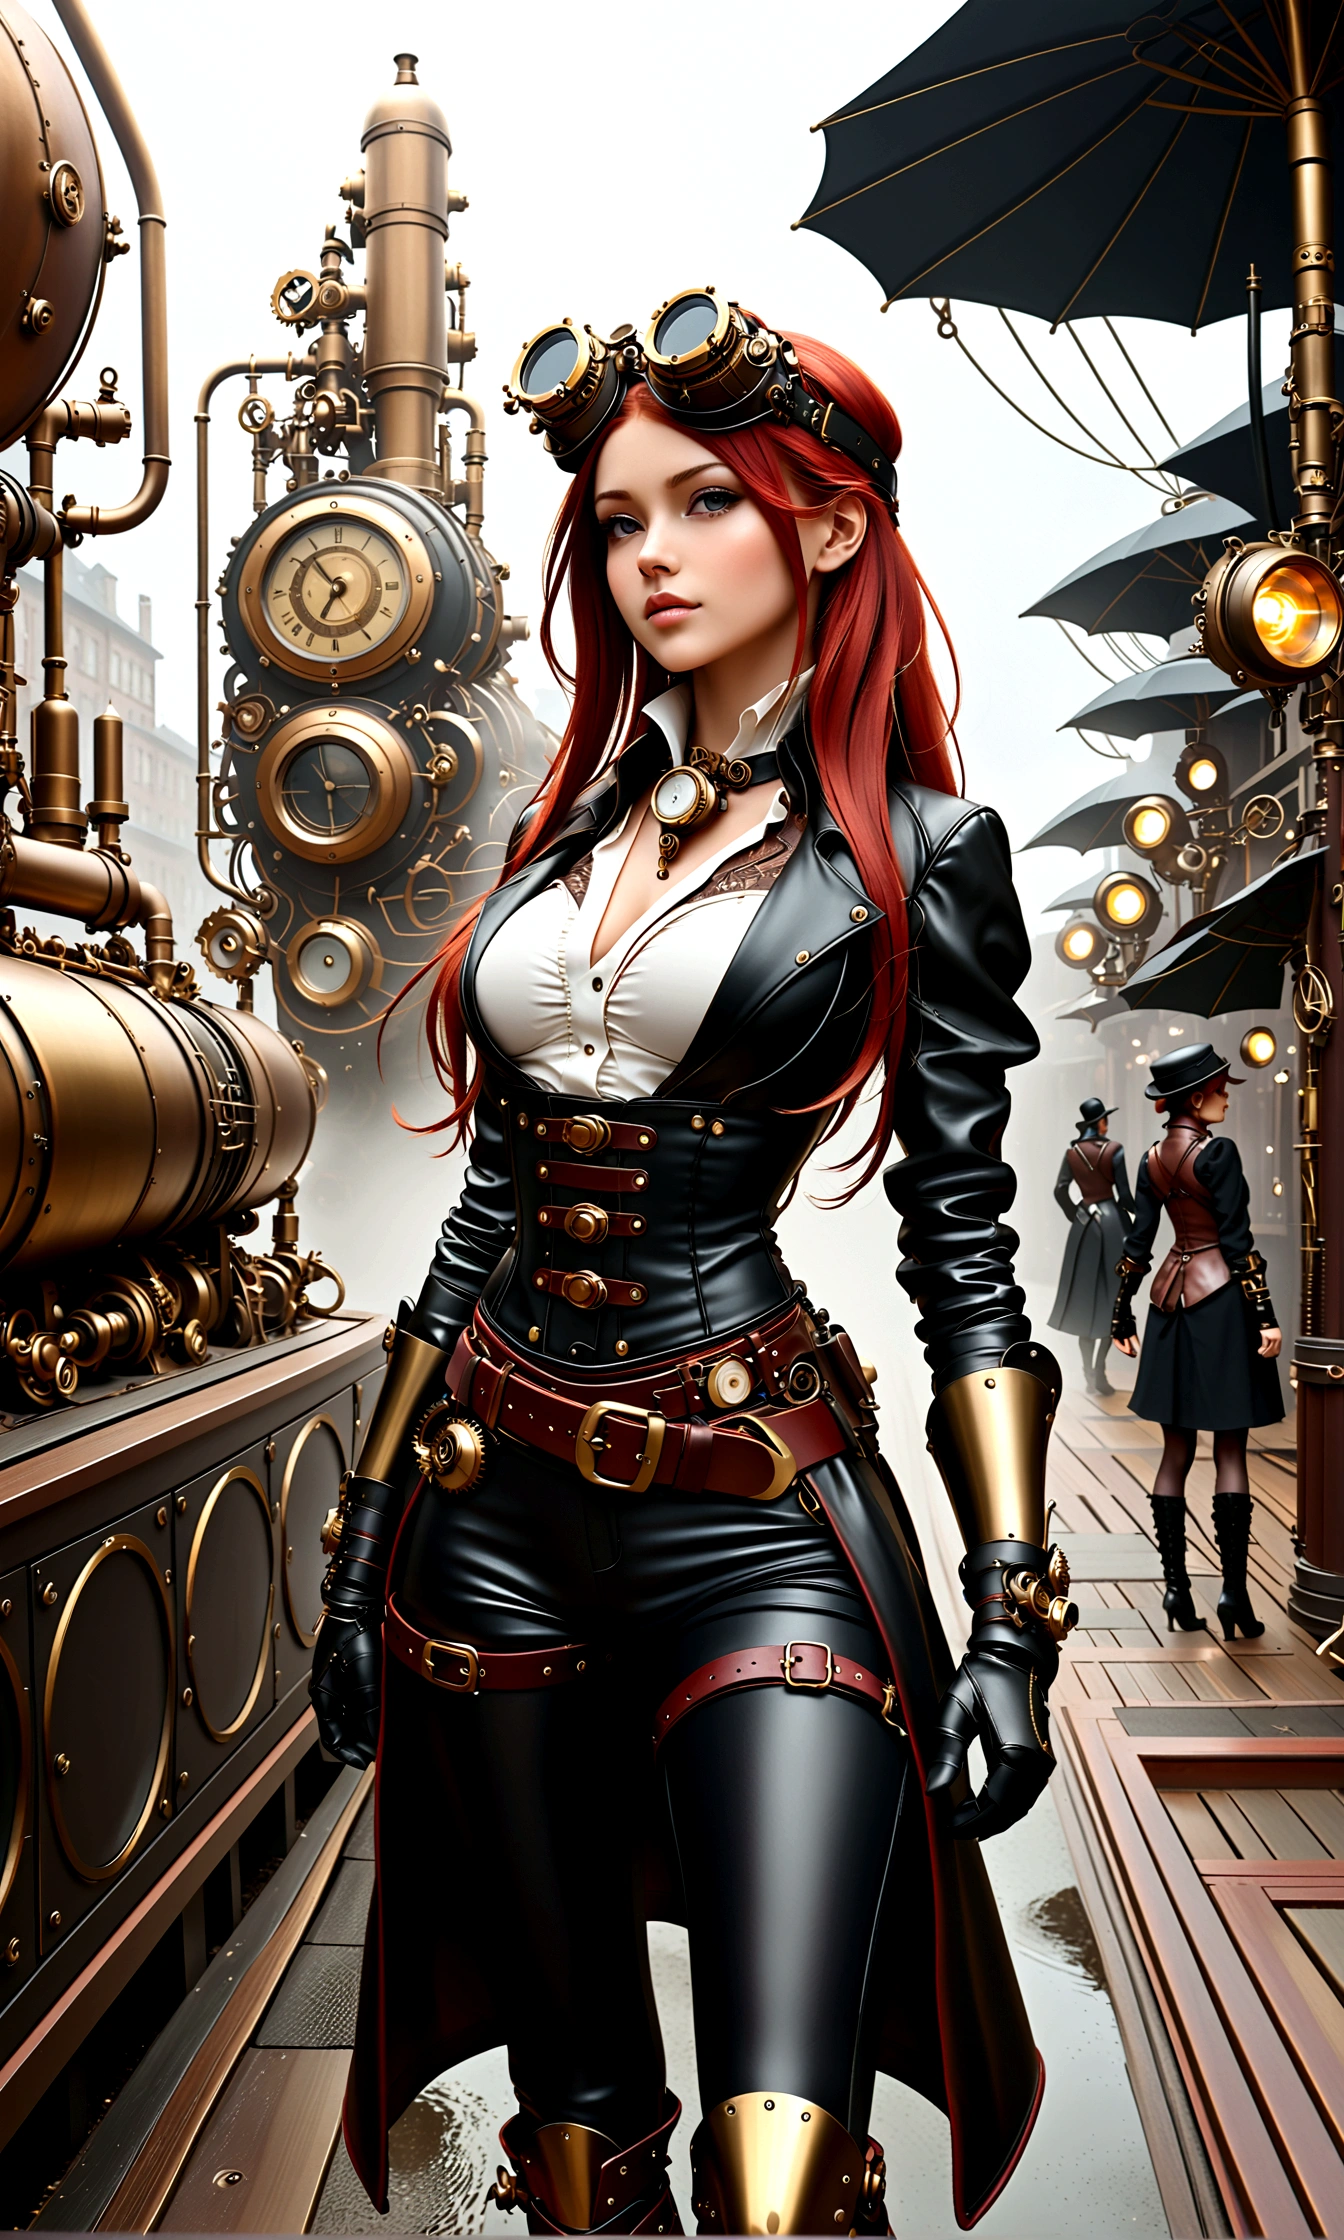 ganzkörper, ganzkörper bild(head to toe in frame)((Masterpiece)),mfbp1, (Best Quality), (Cinematic),(Extremely detailed CG Unity 8k wallpaper), 1 girl, fit,Delicious company, small breasts,(no goggles on face)(very long redhair),one Stunning red-haired steampunk woman who lost her forearm in an accident received a beautifully designed, fine and perfectly fitting robotic prosthesis (steampunk style) as a replacement, posing coolly in front of machines and factories. With this prosthesis she shows us a sealed, delicate poison glass bottle with blue liquid in it. Hand-forearm prosthesis made of brass and leather. She wears tight-fitting clothing (steampunk leather suit with cut-outs on hips and belly and buckles).the forearms are nude to show the prothetic arm, hoes and decorative wielding goggles in her hair on head, also made of brass and leather. The landscape is a bit gloomy, but also impressive.,1 line drawing,make up,steampunk style 